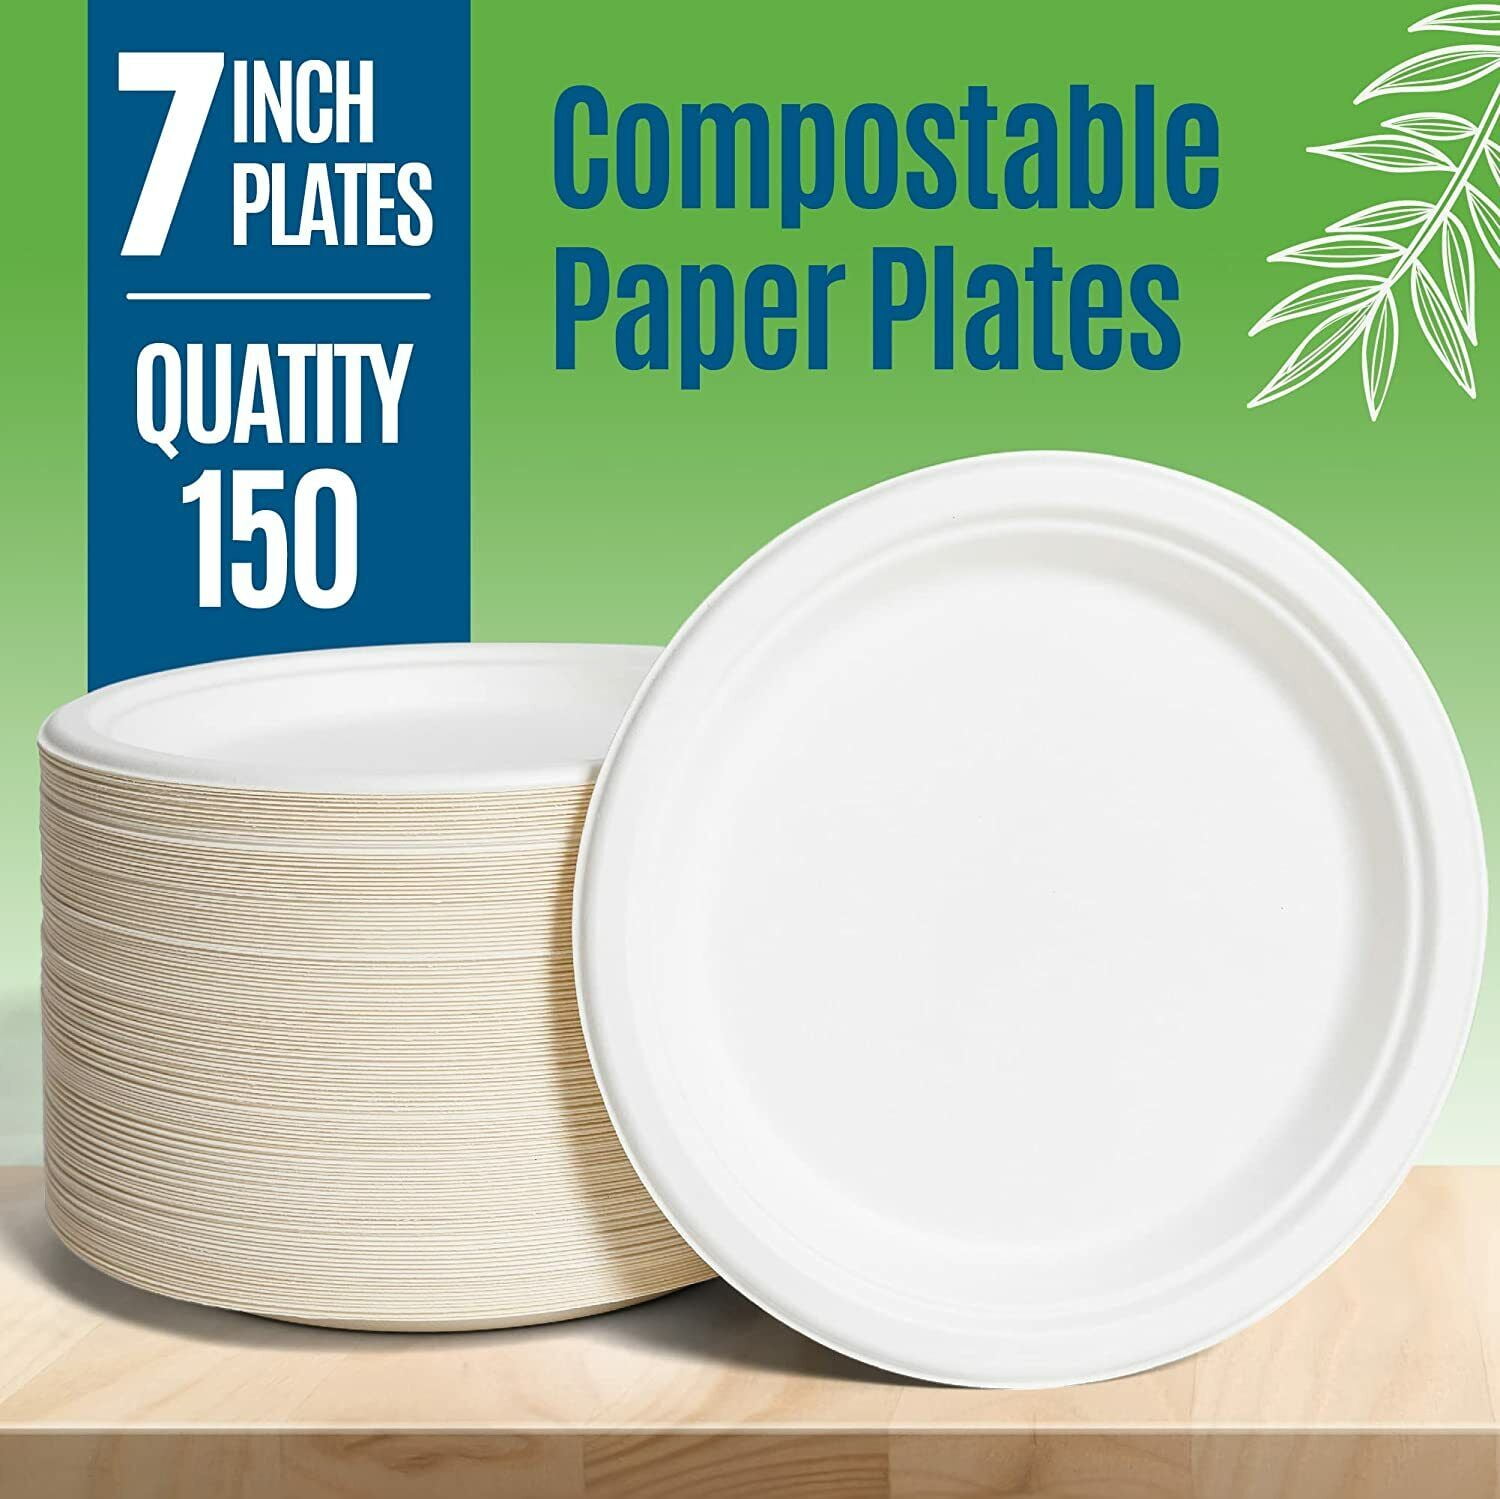 [100 PACK] White Disposable Paper Plates 6 Inch by EcoQuality - Perfect for  Parties, BBQ, Catering, Office, Event's, Pizza, Restaurants, Recyclable